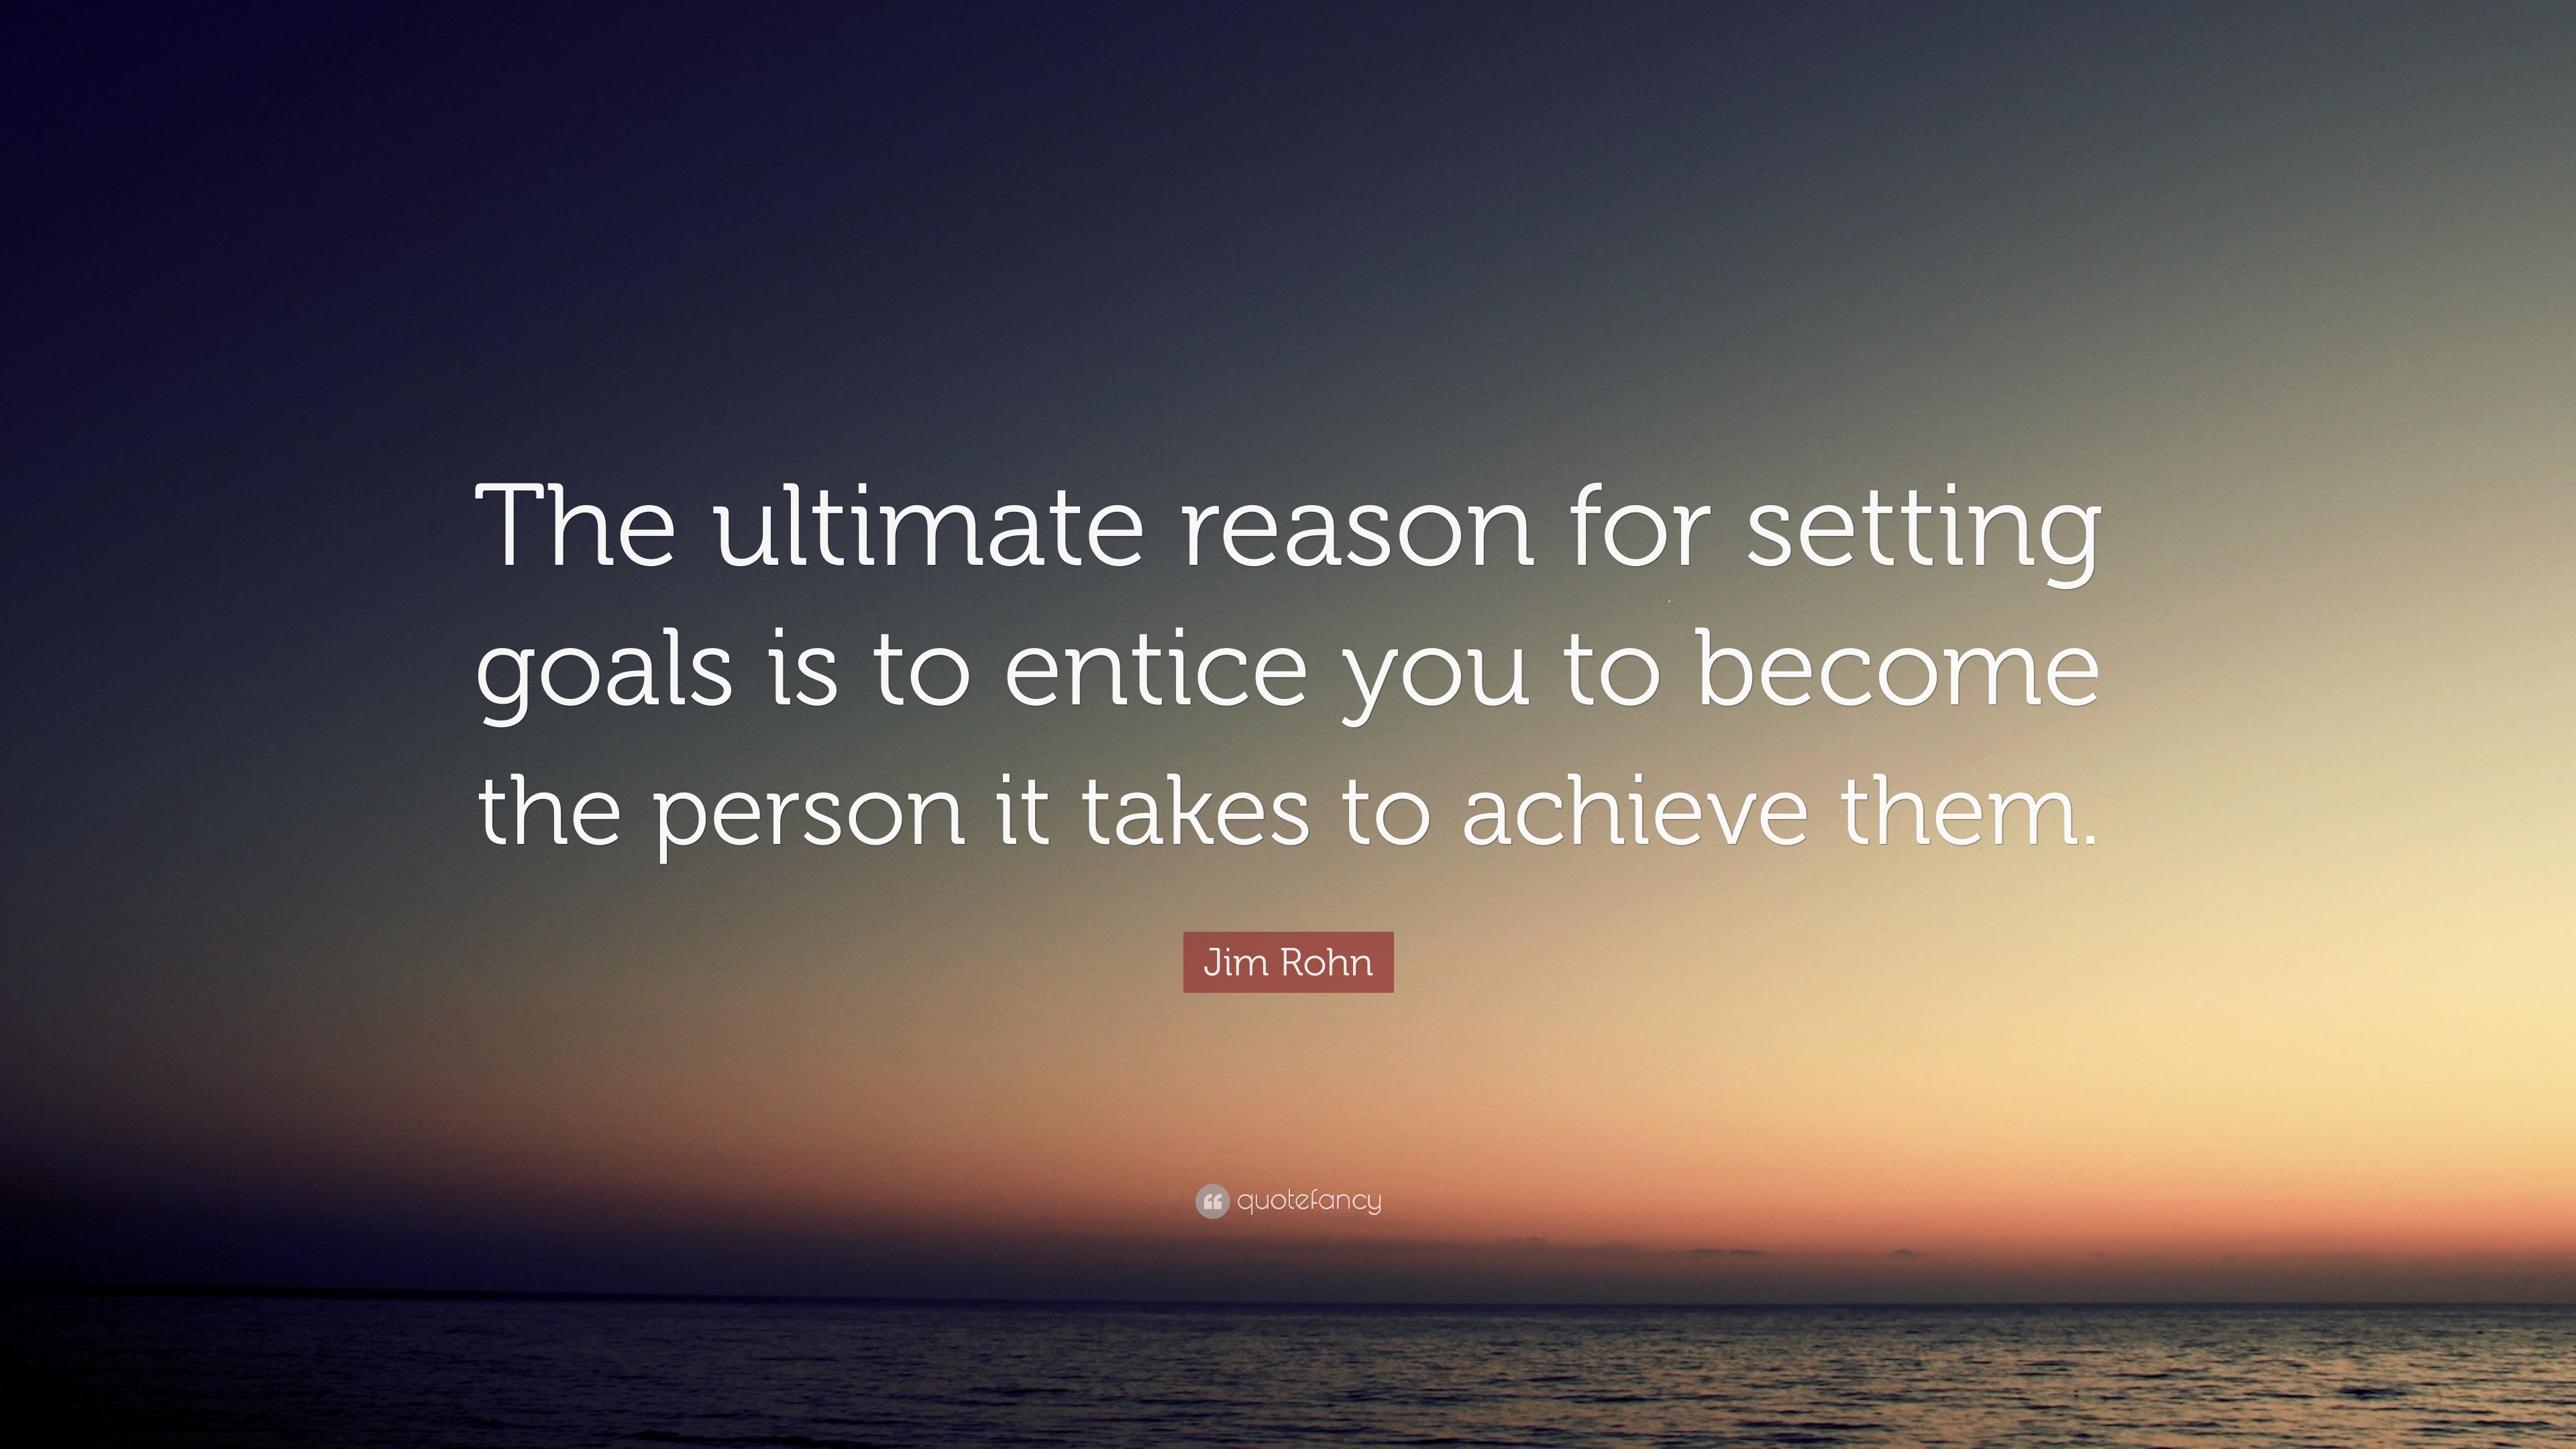 Jim Rohn Quote: “The ultimate reason for setting goals is to entice you ...